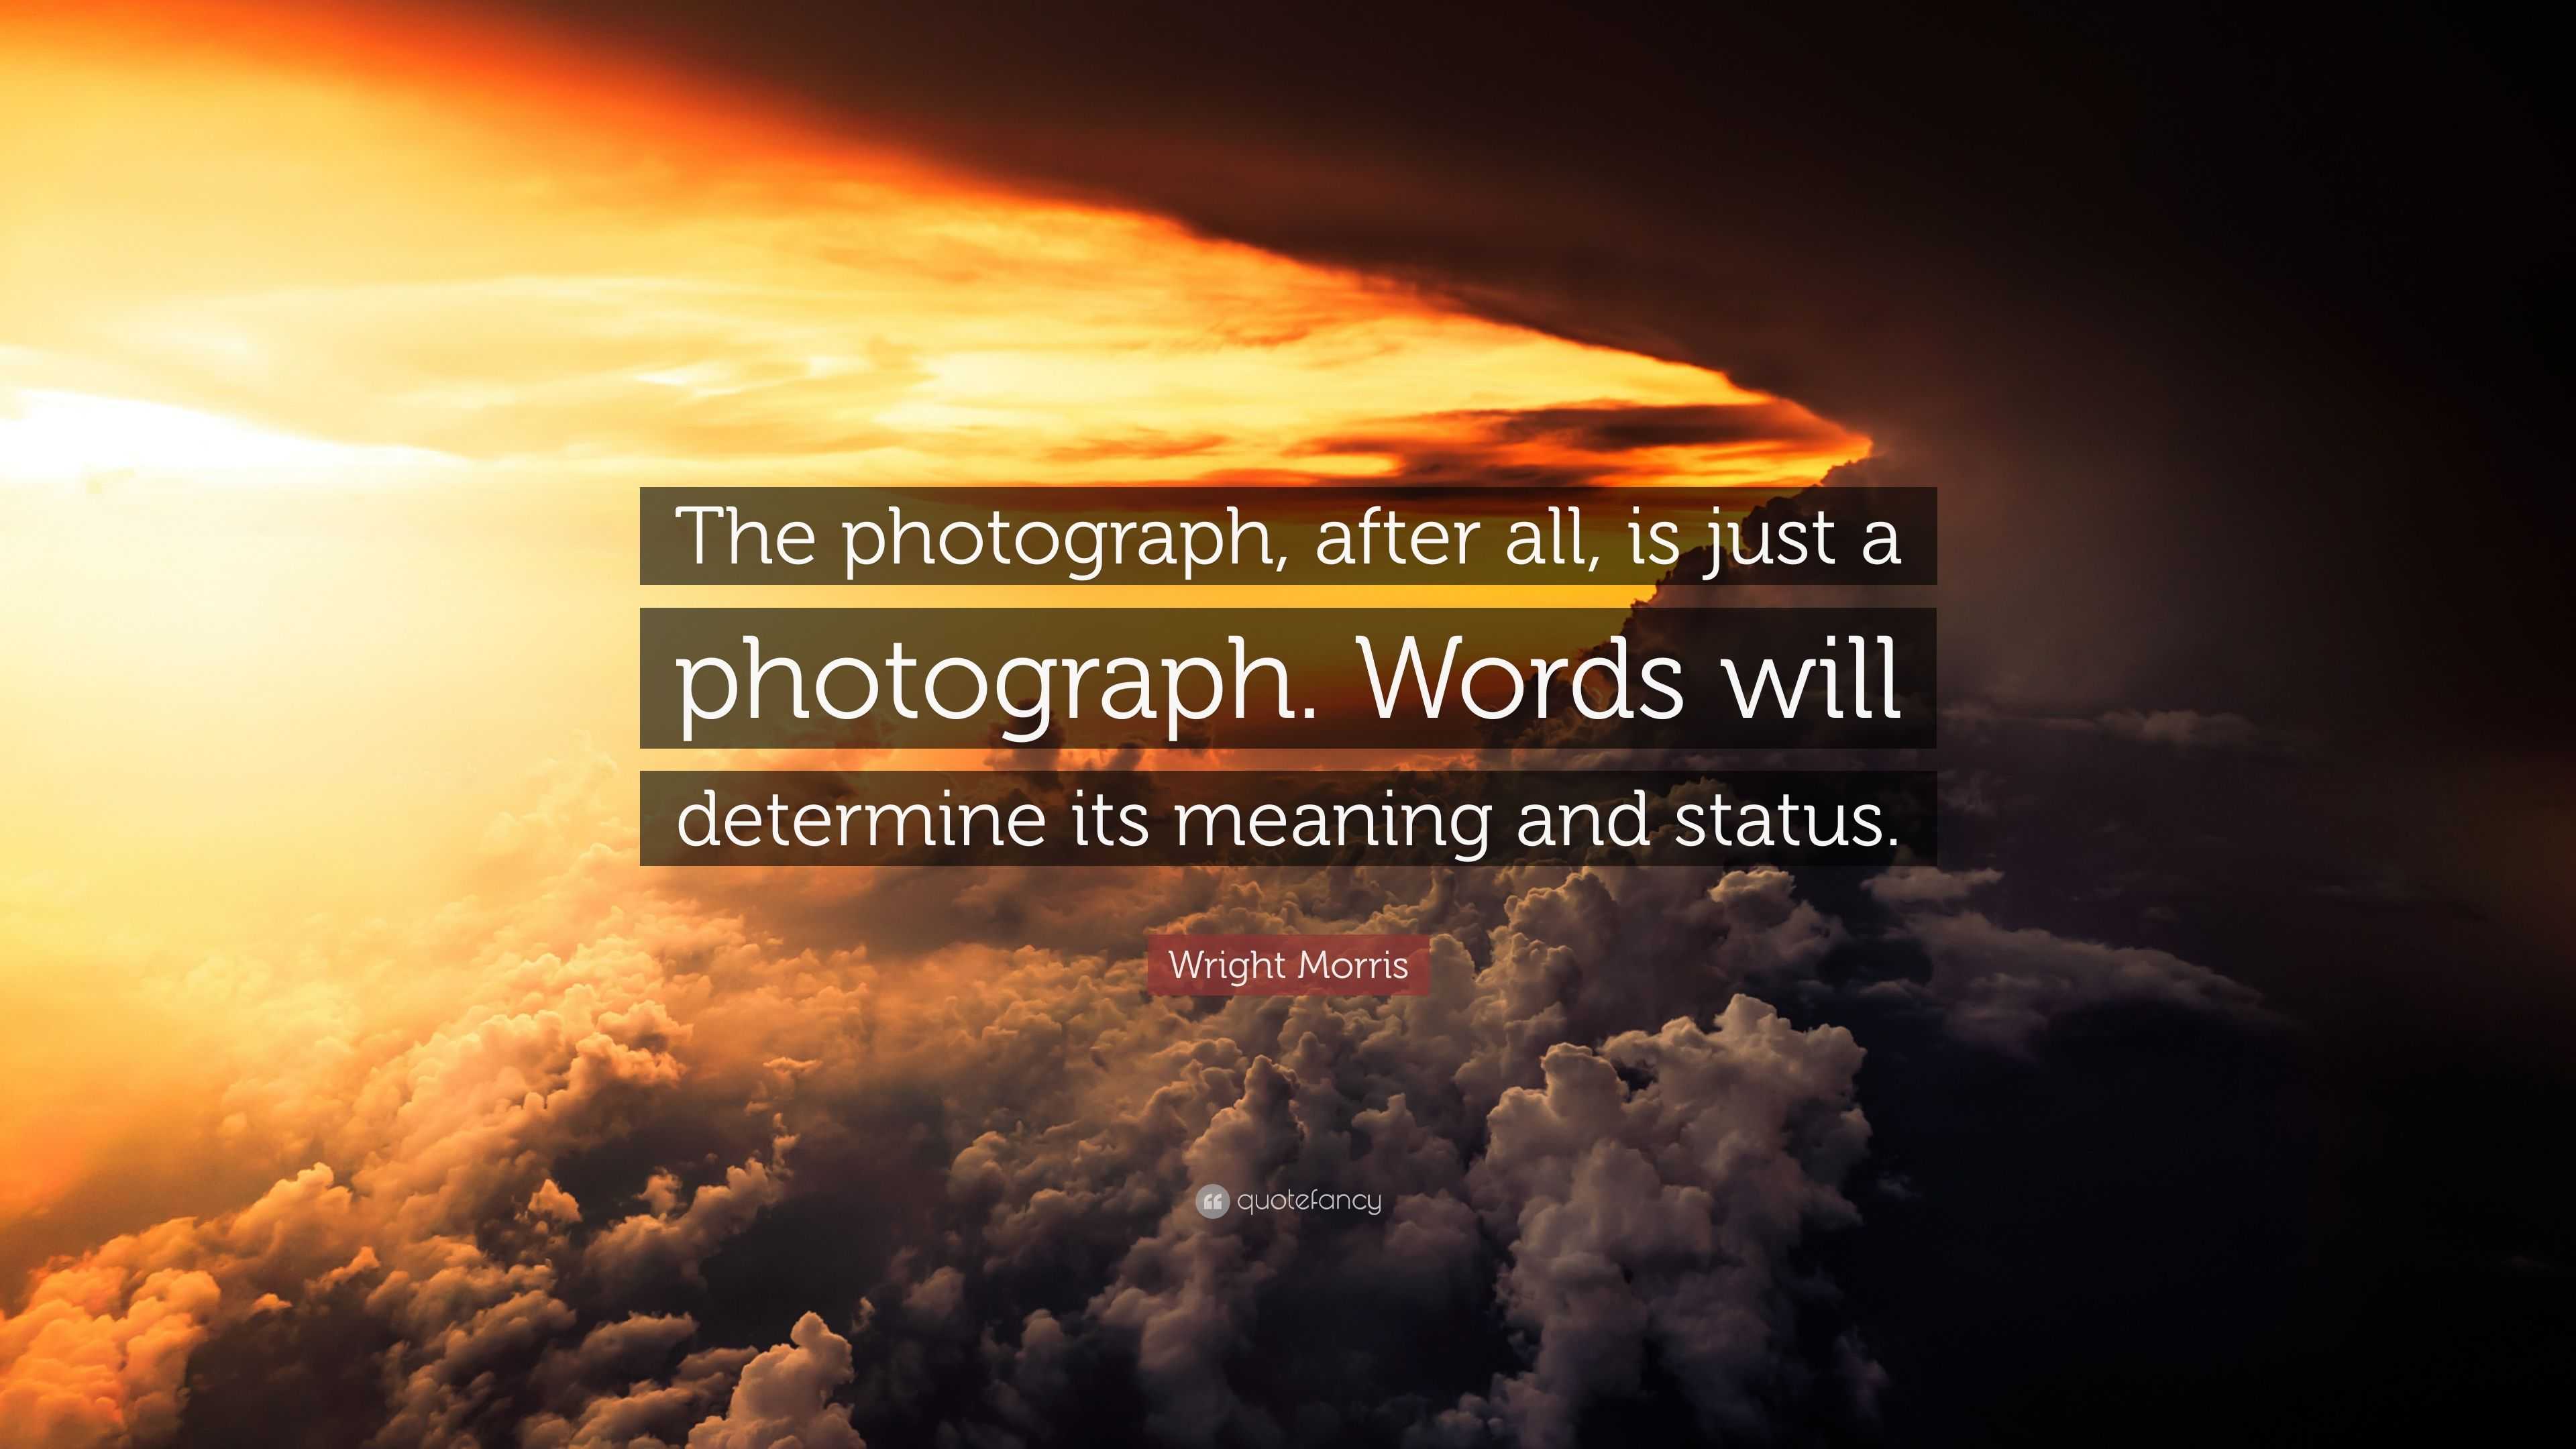 Wright Morris Quote: “The photograph, after all, is just a photograph ...